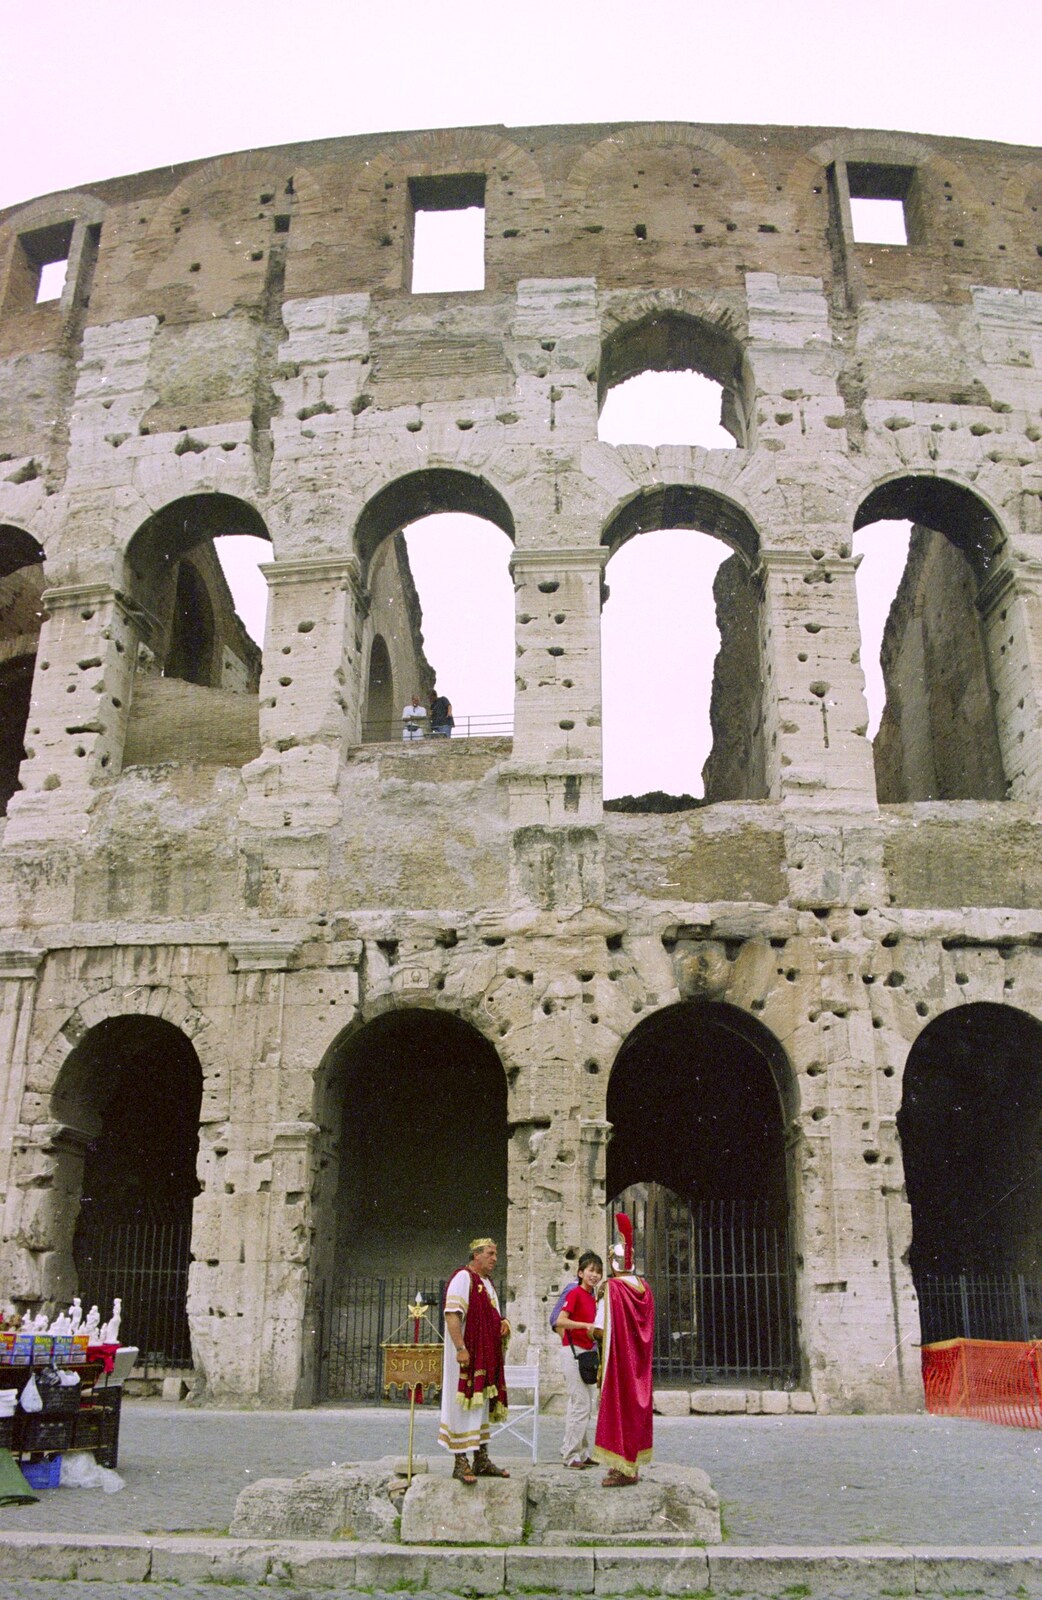 'Romans' outside the Colosseum from A Working Trip to Rome, Italy - 10th September 1999